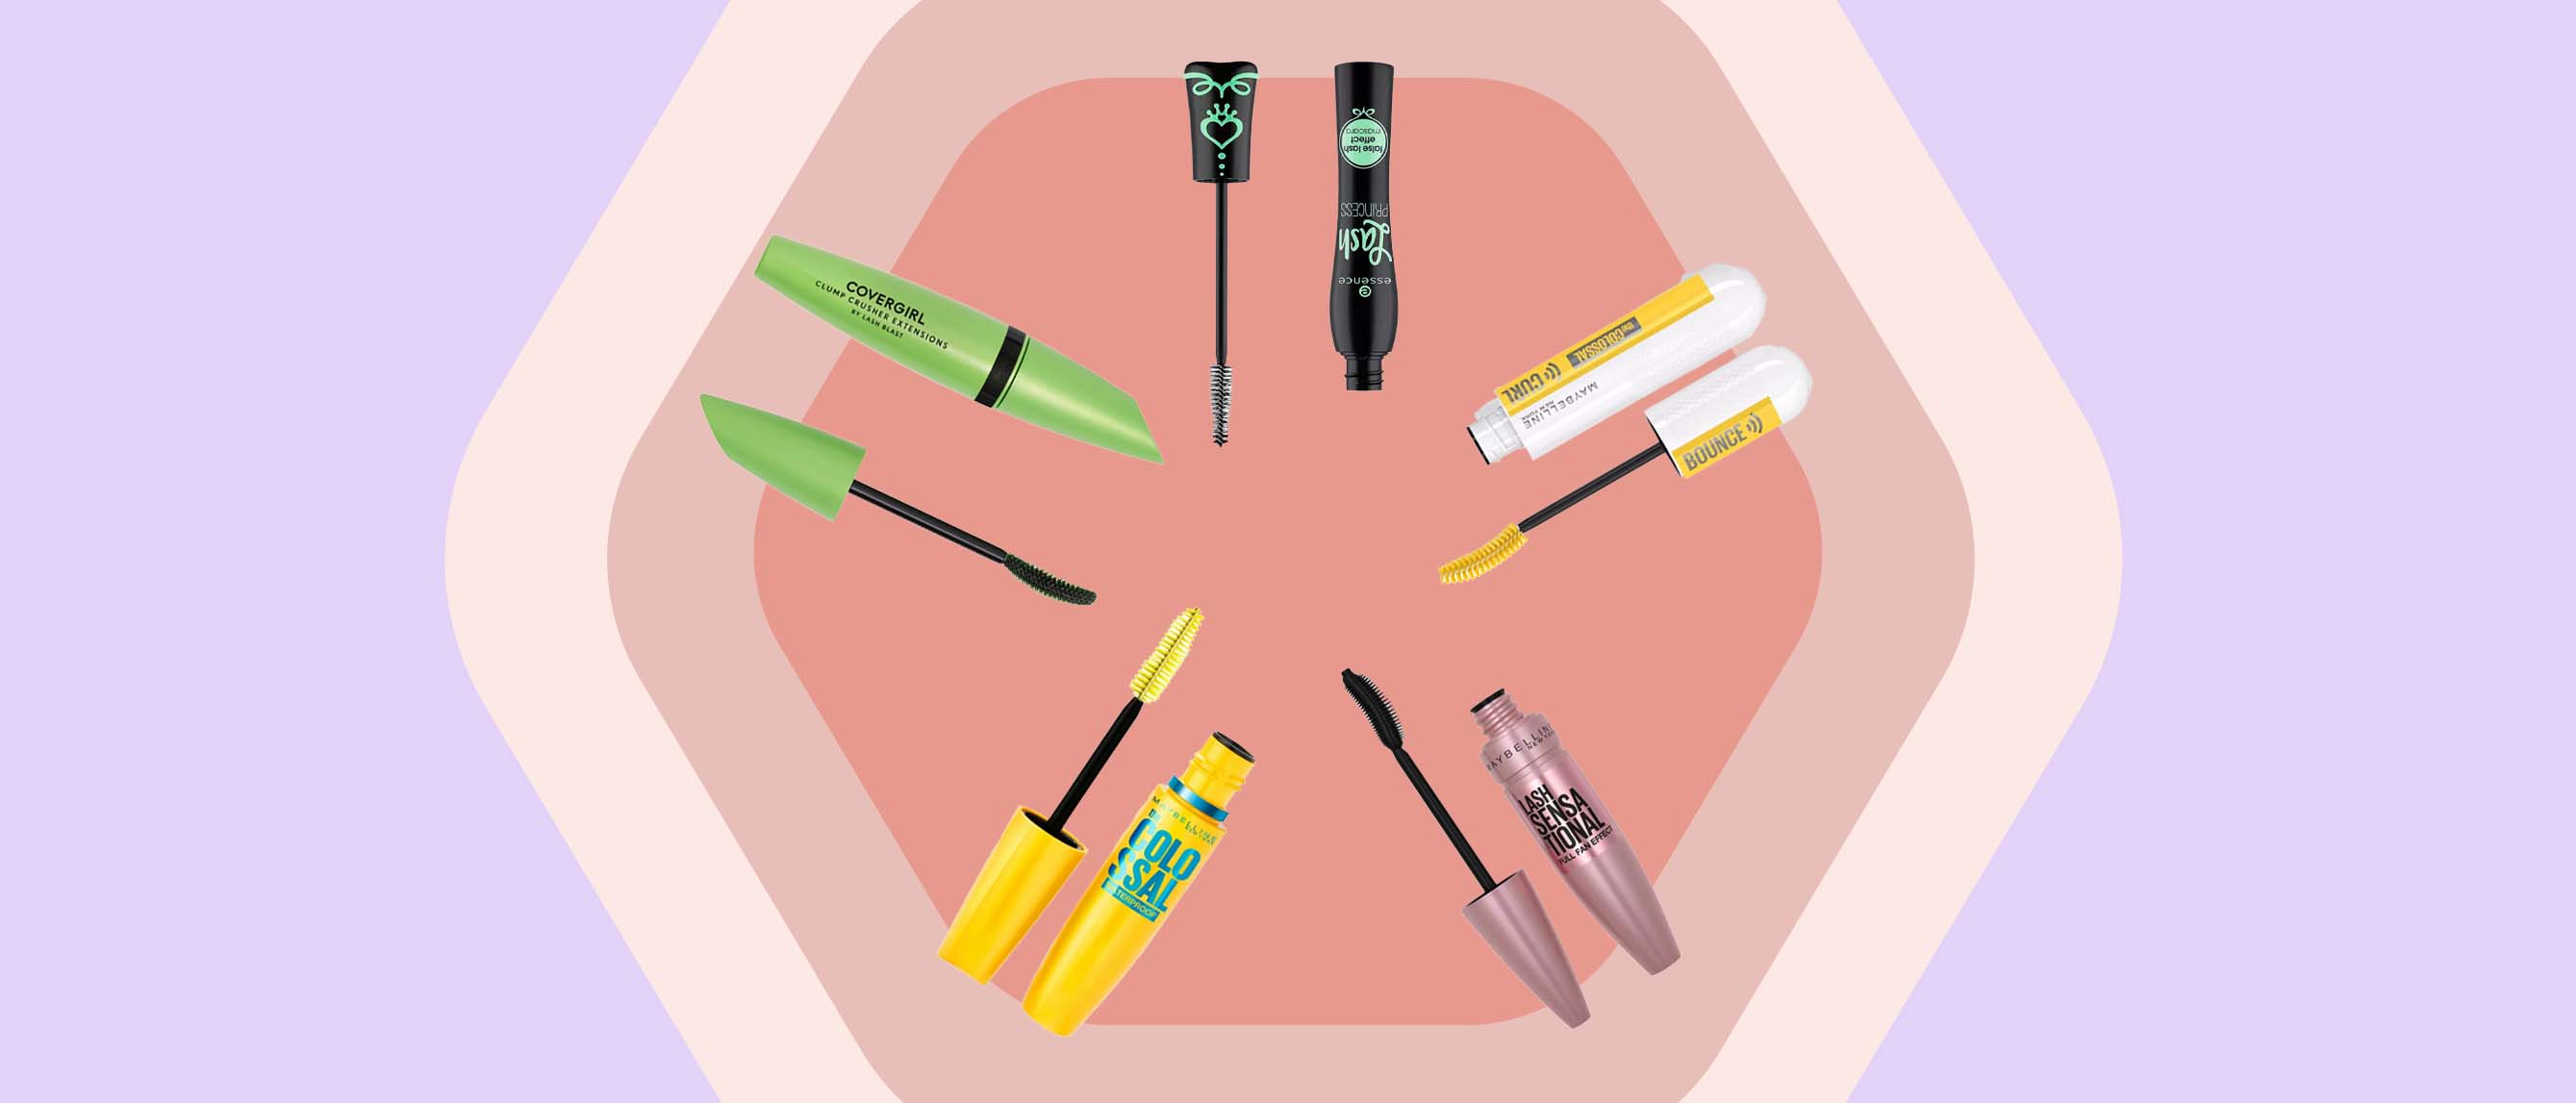 five tubes and brushes of mascara in a star shape